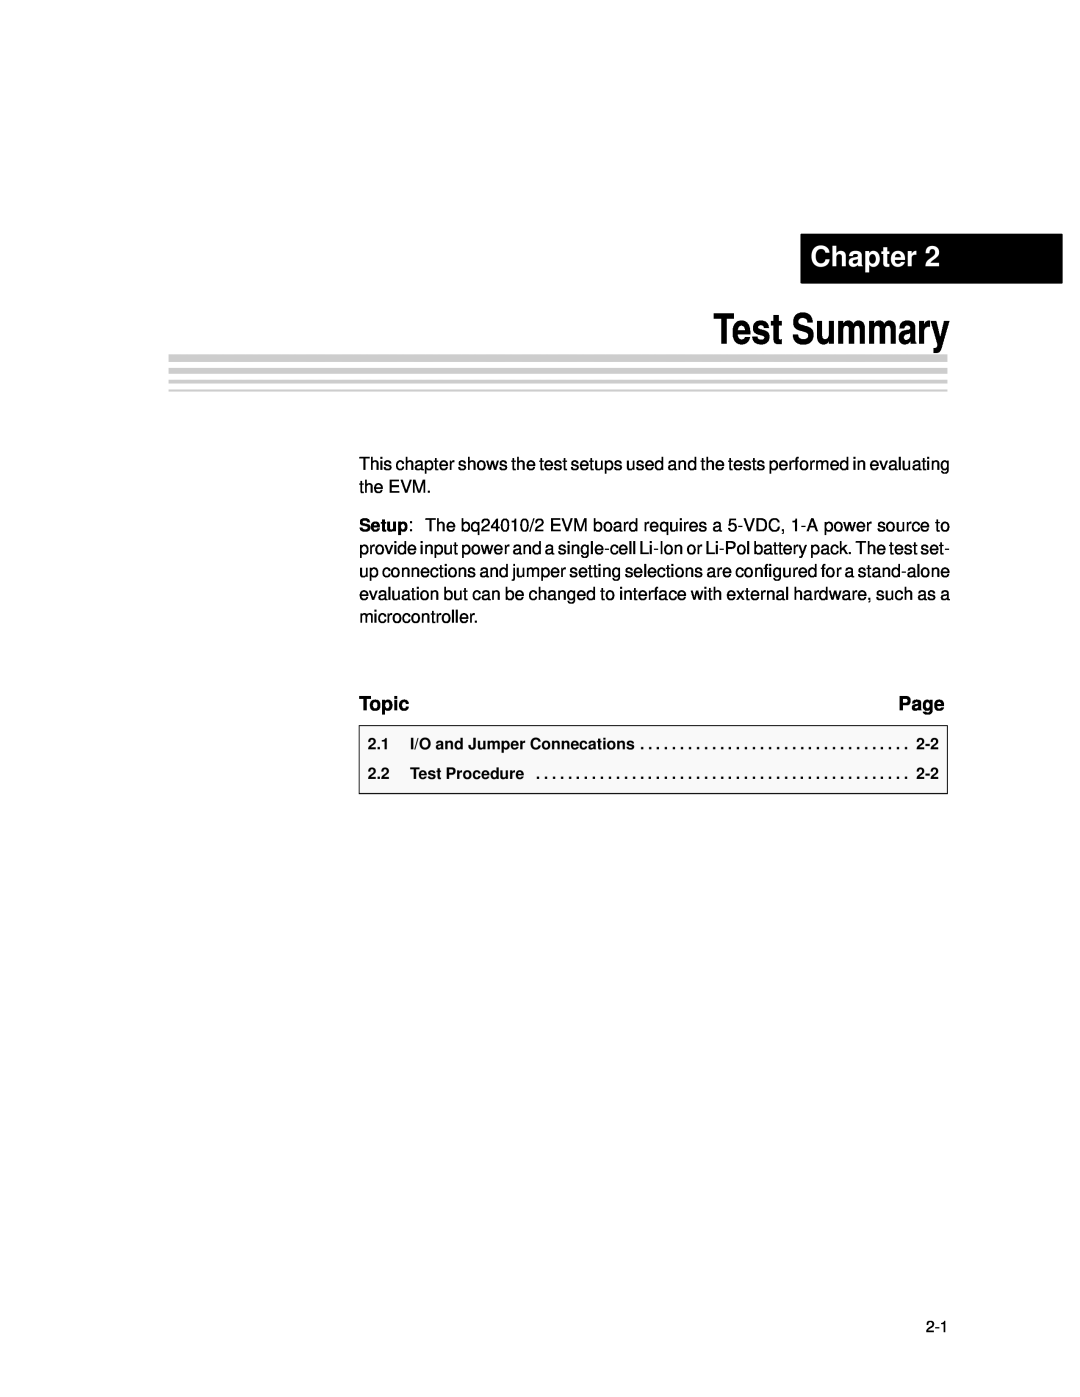 Texas Instruments bq24010/2 manual Test Summary, Chapter, Page, Topic 